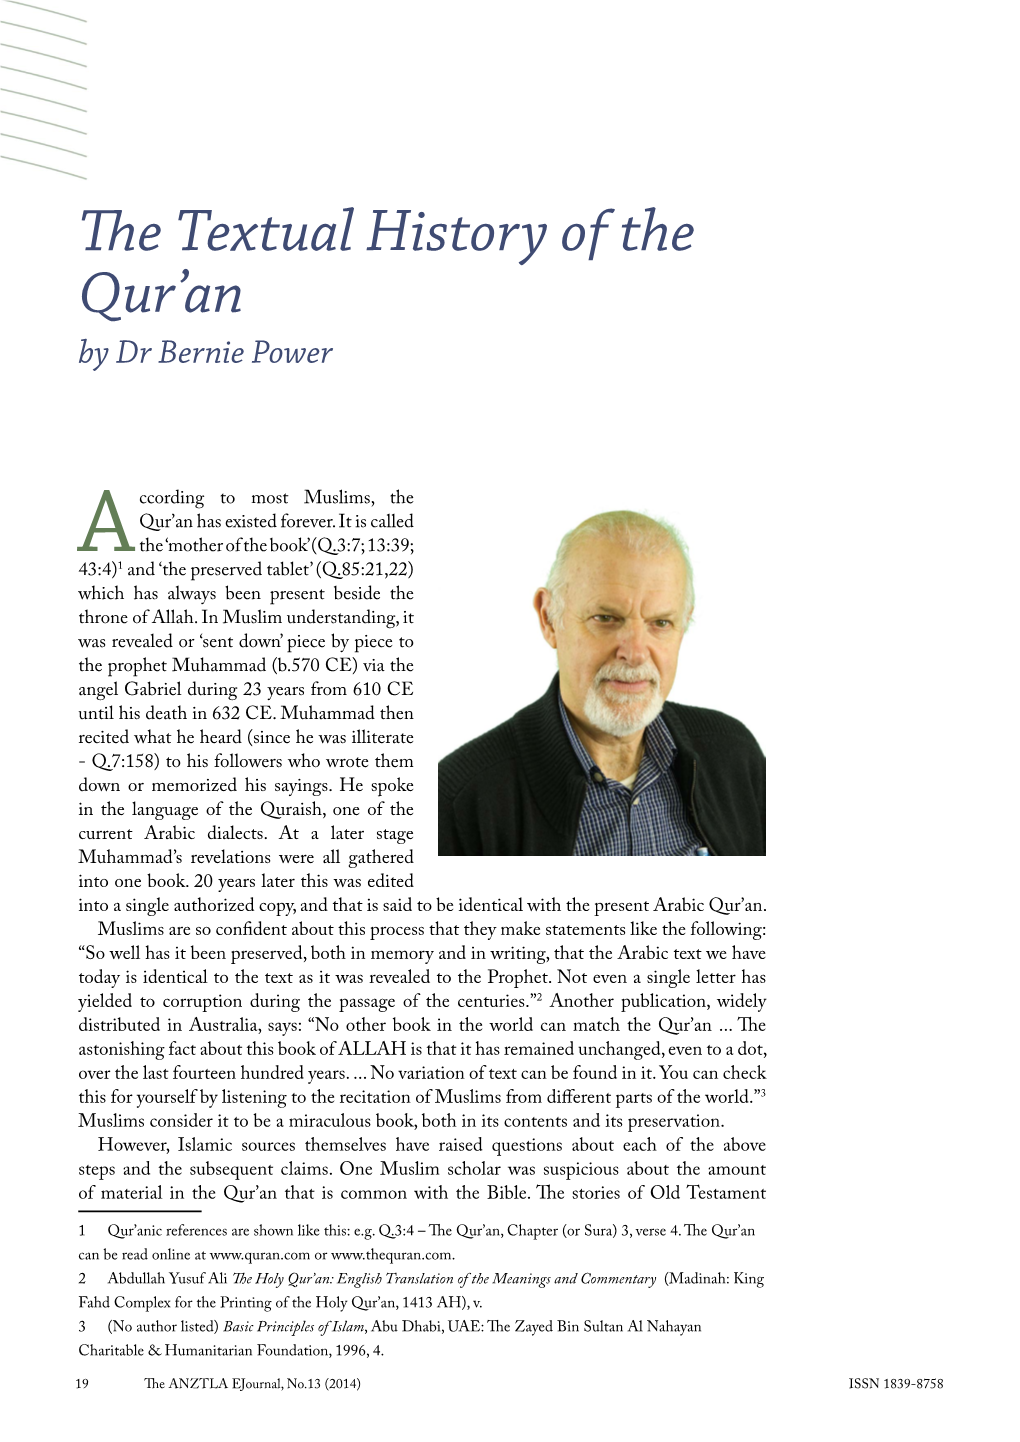 The Textual History of the Qur'an